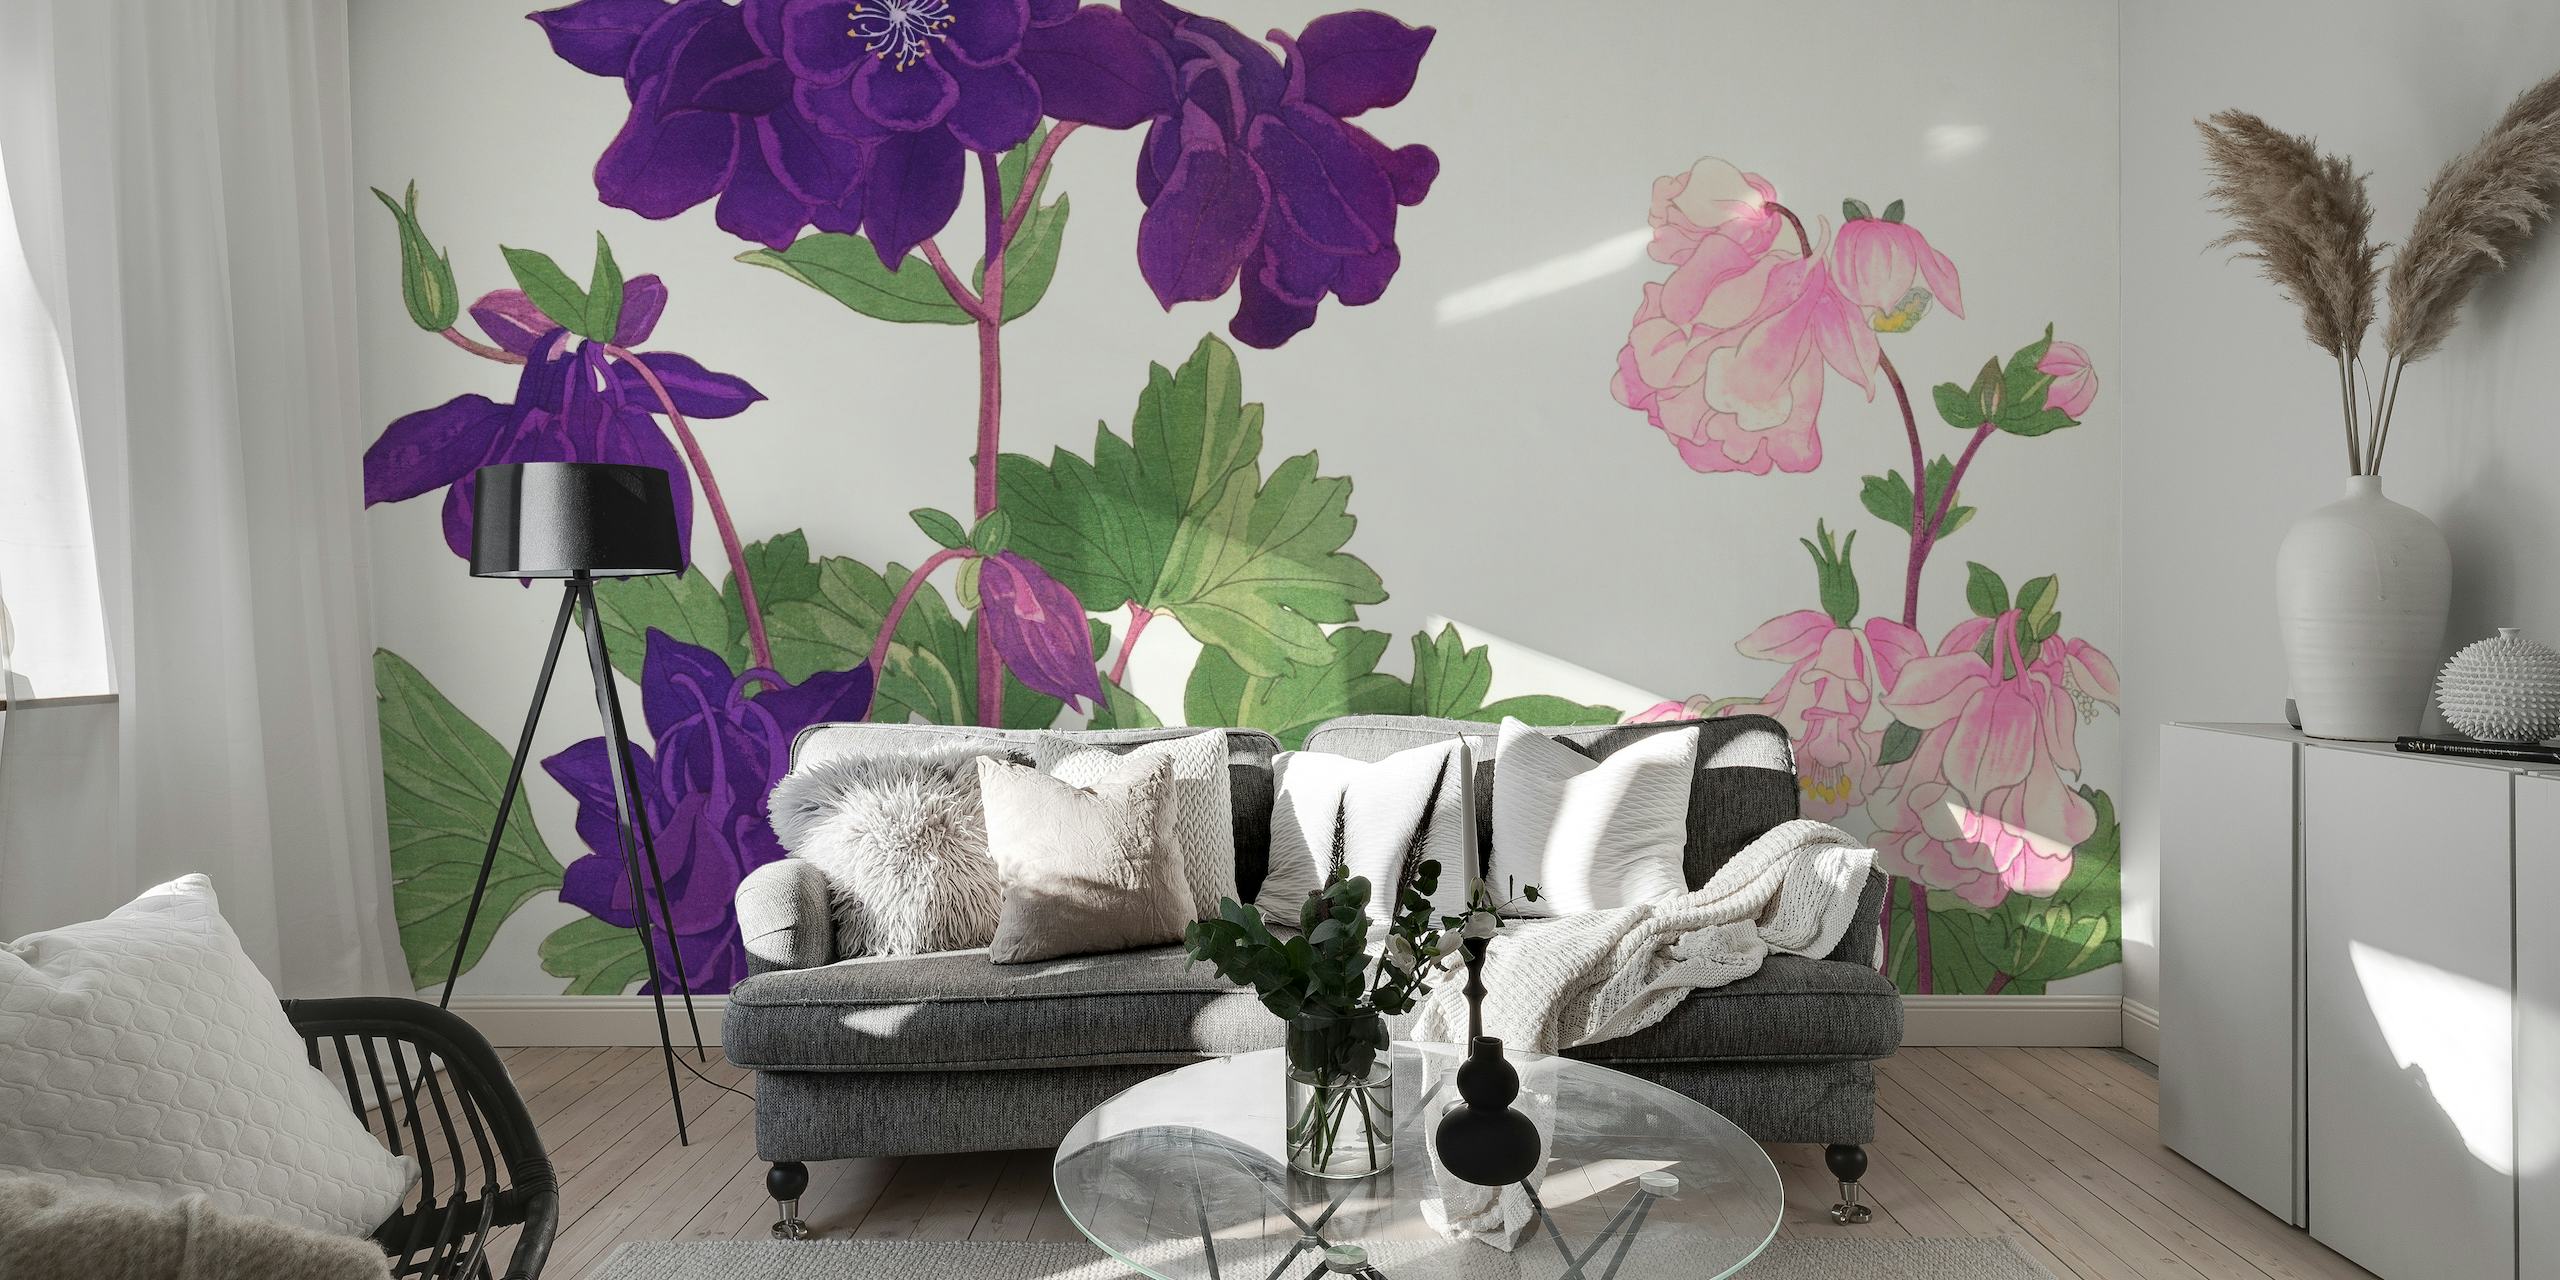 Scandinavian-inspired Scandi Gardens wall mural with purple and pink flowers